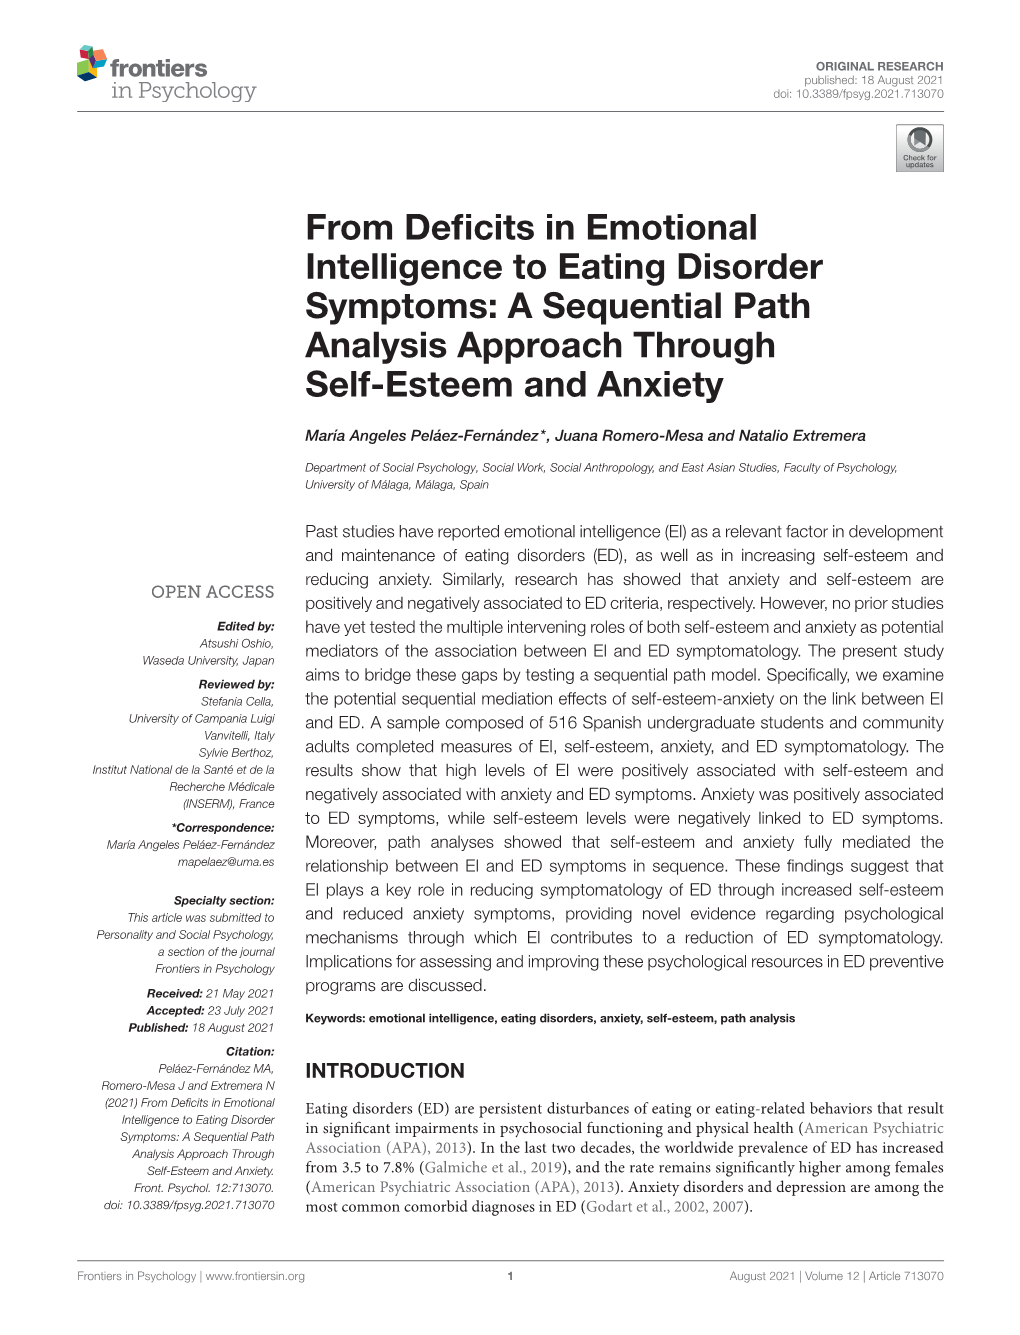 From Deficits in Emotional Intelligence to Eating Disorder